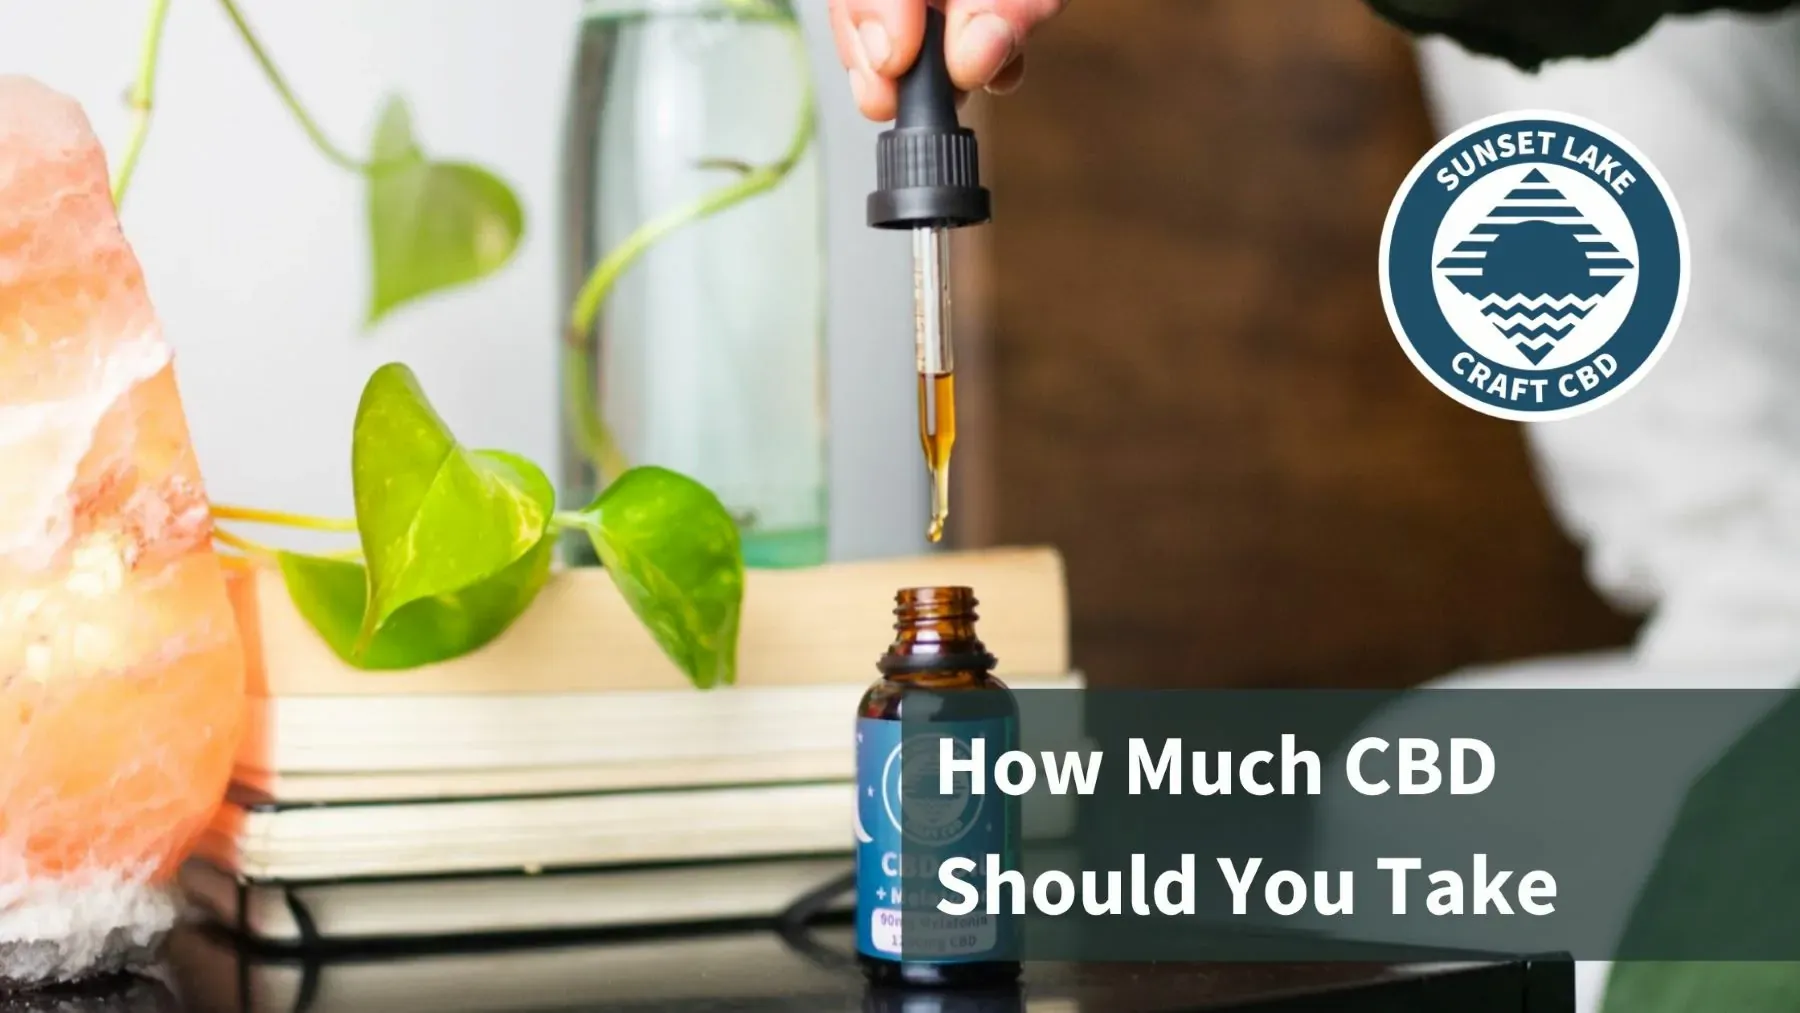 A dropper of CBD oil with text that says "How much CBD Should You Take?"